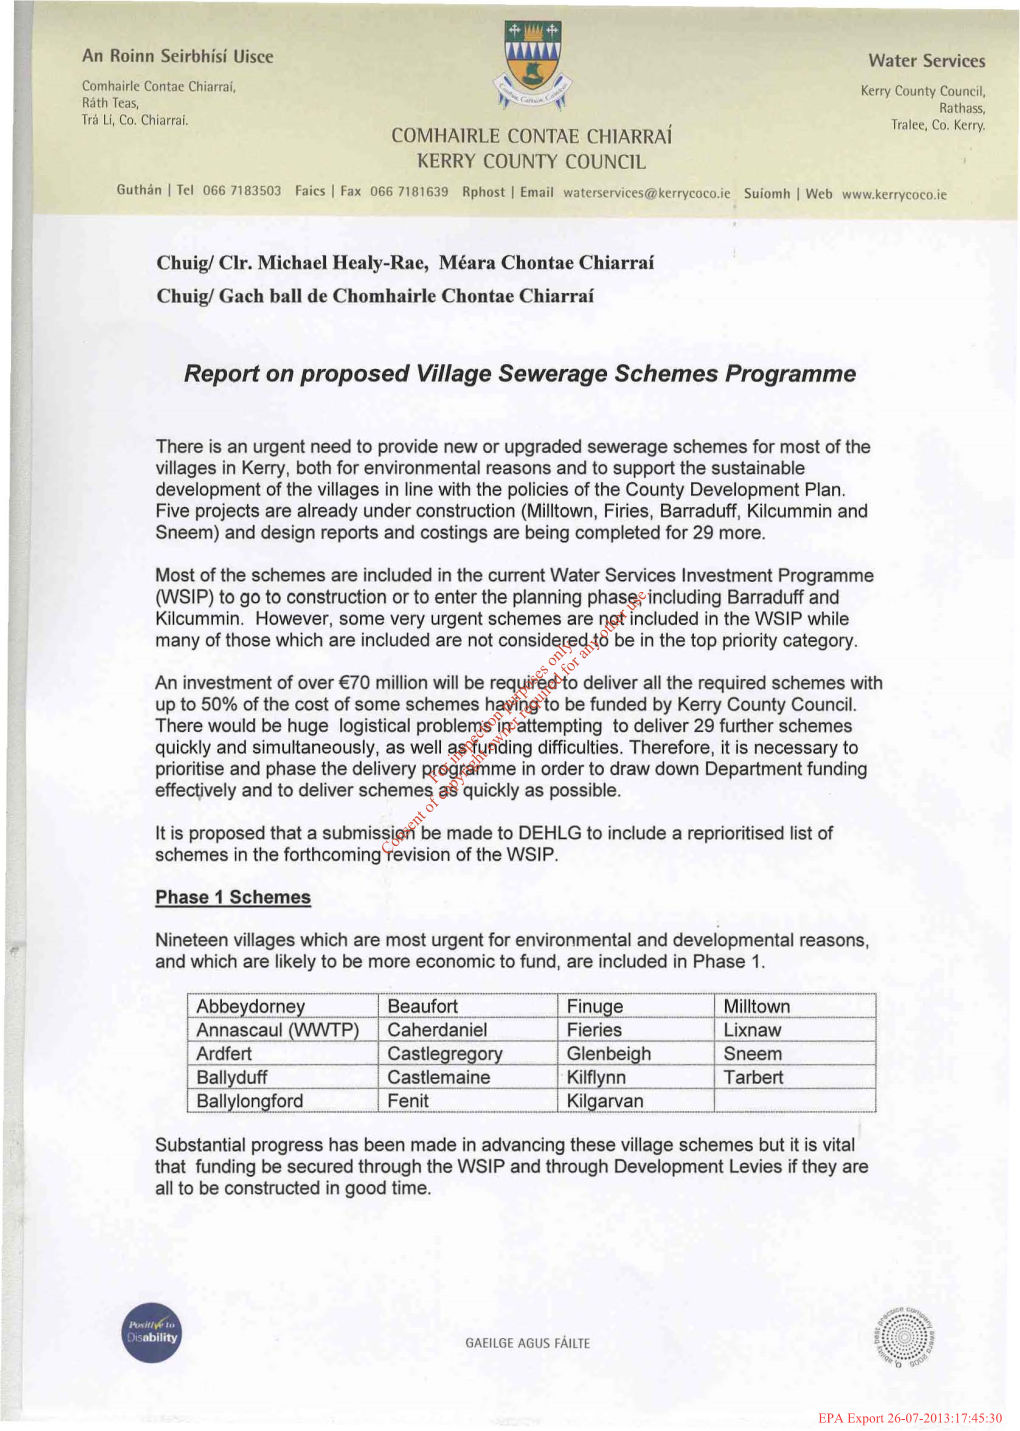 Report on Proposed Village Sewerage Schemes Programme